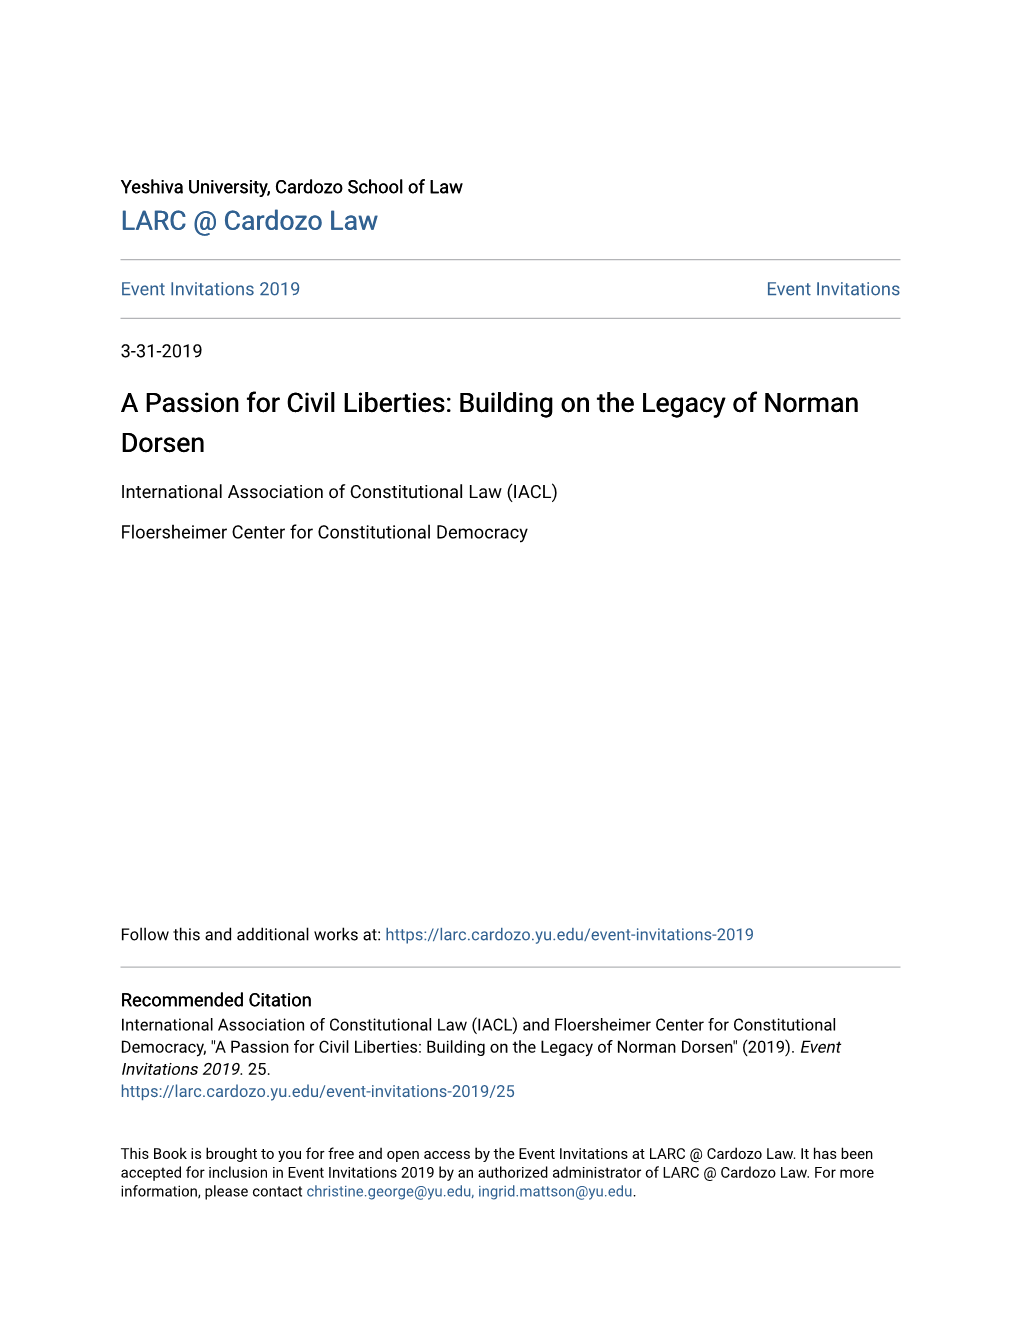 A Passion for Civil Liberties: Building on the Legacy of Norman Dorsen